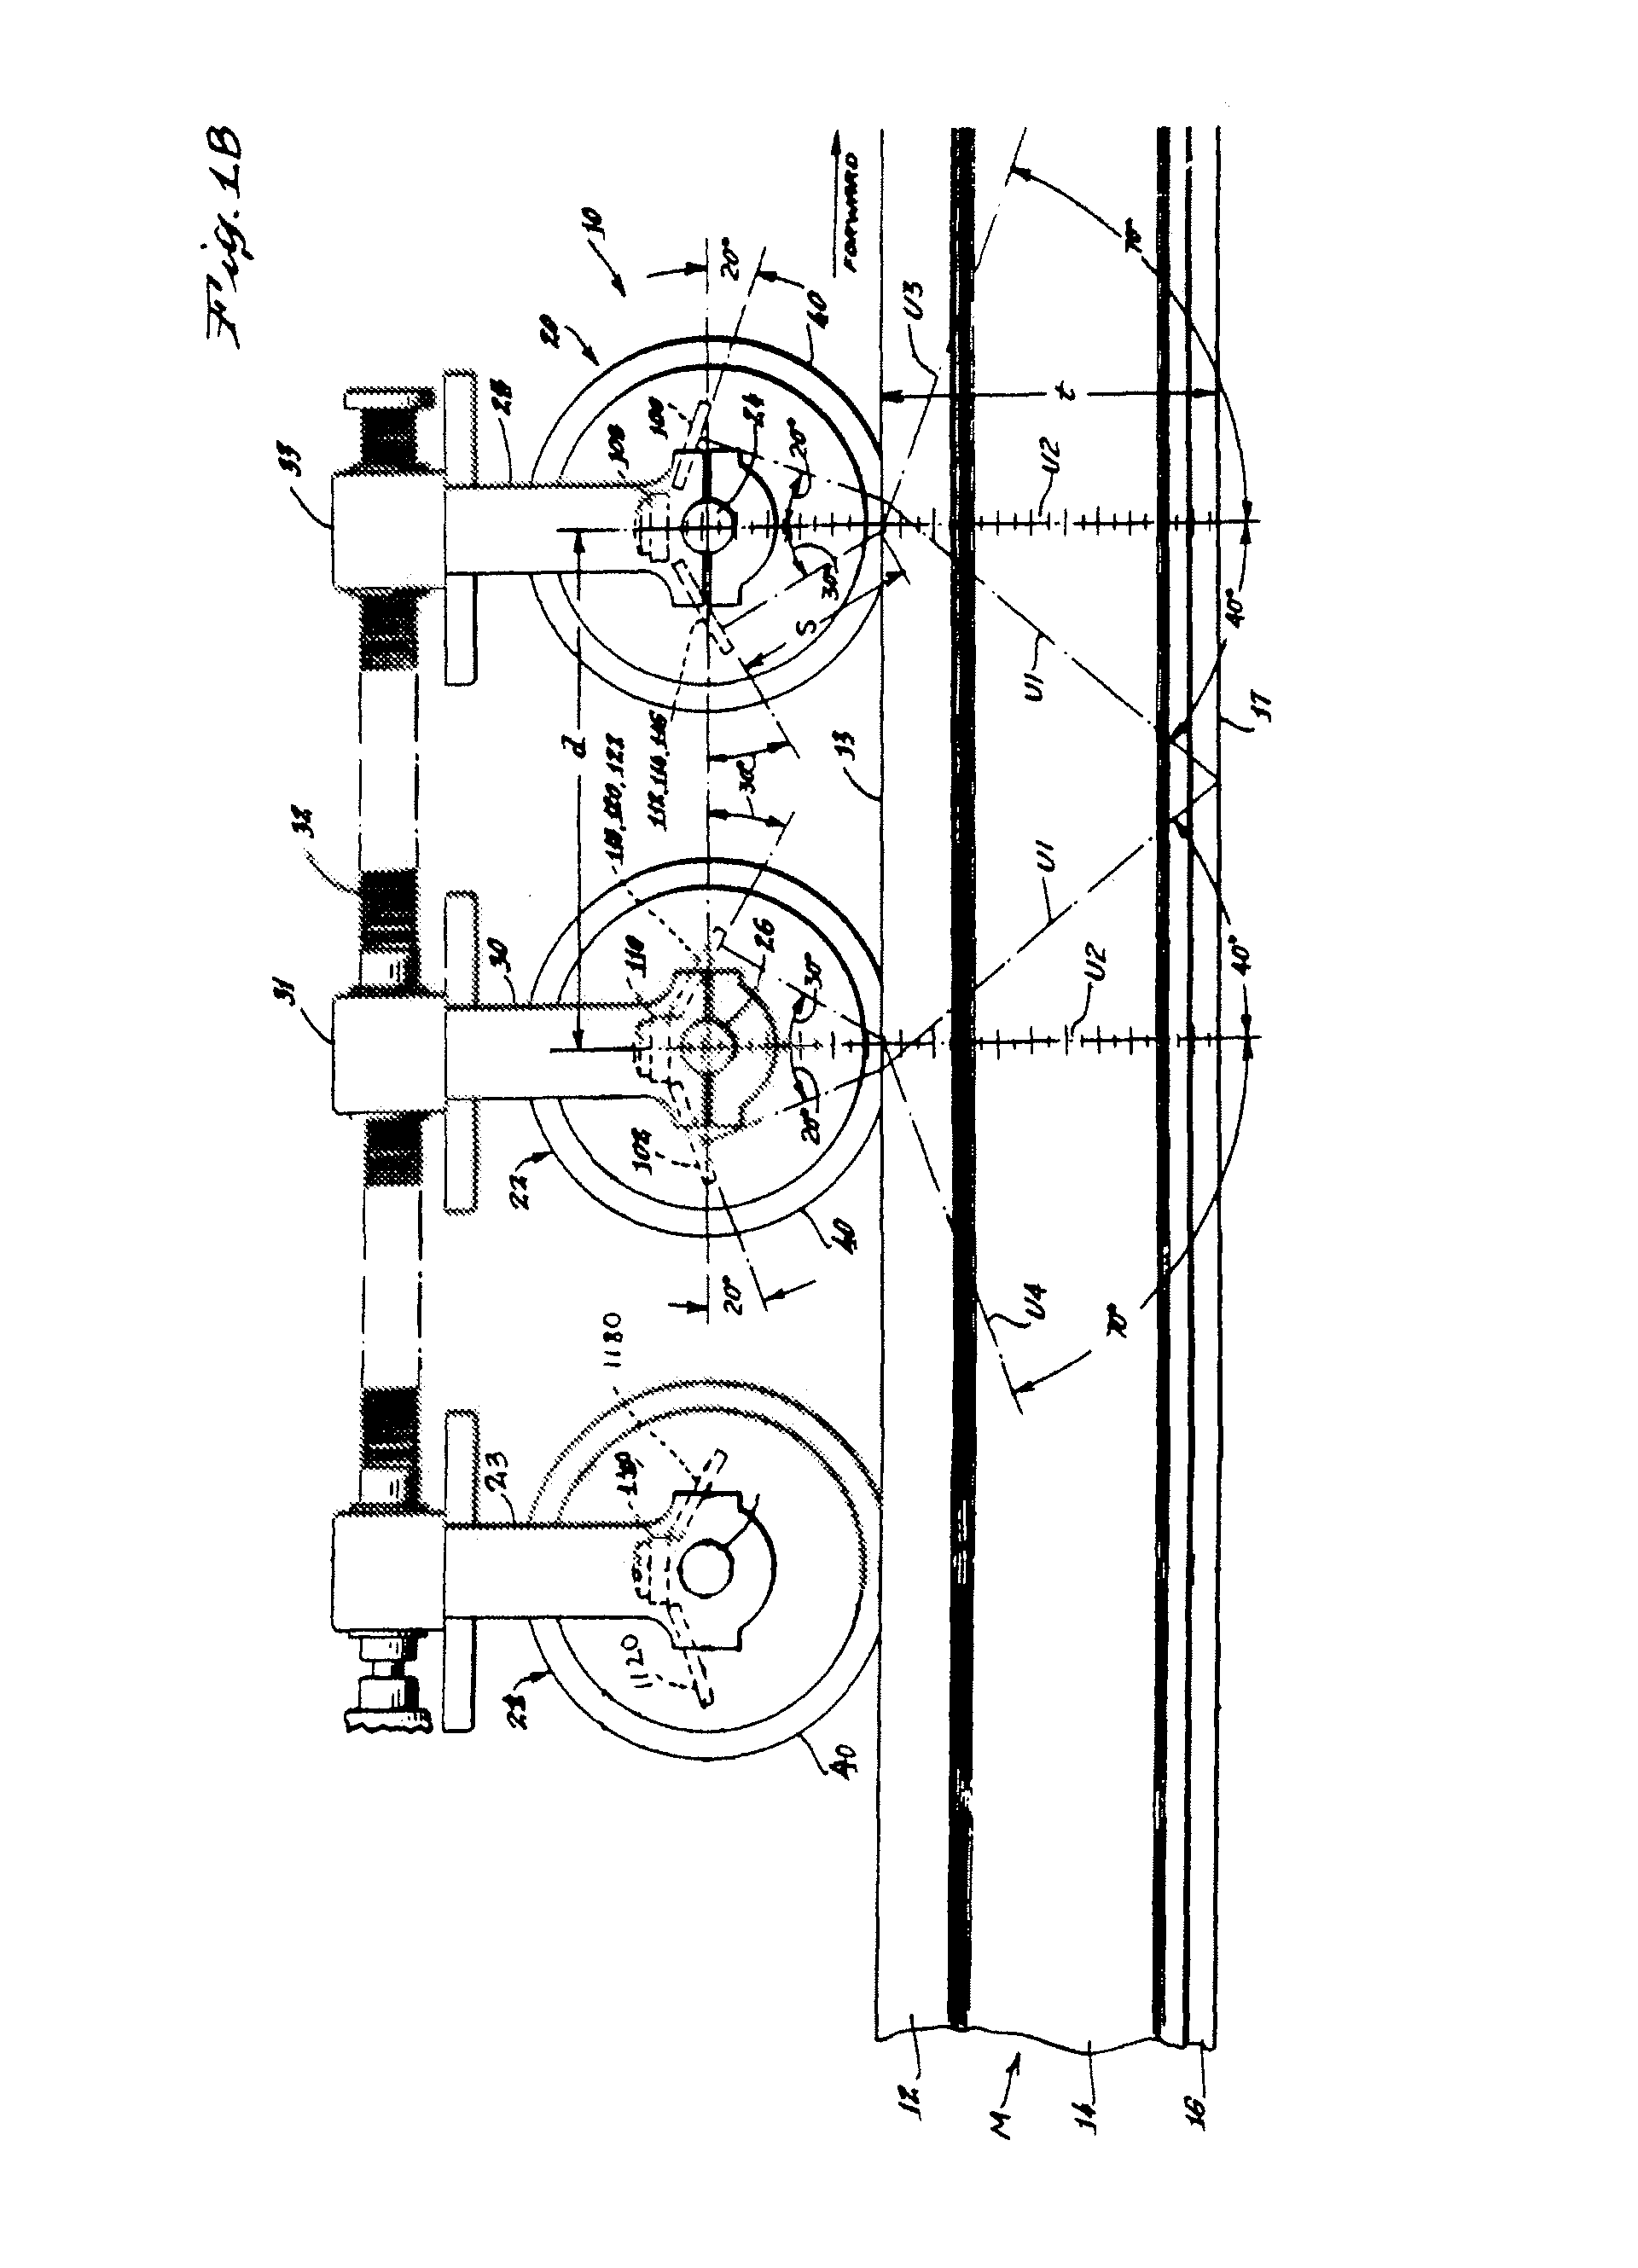 Method and apparatus for detecting internal rail defects